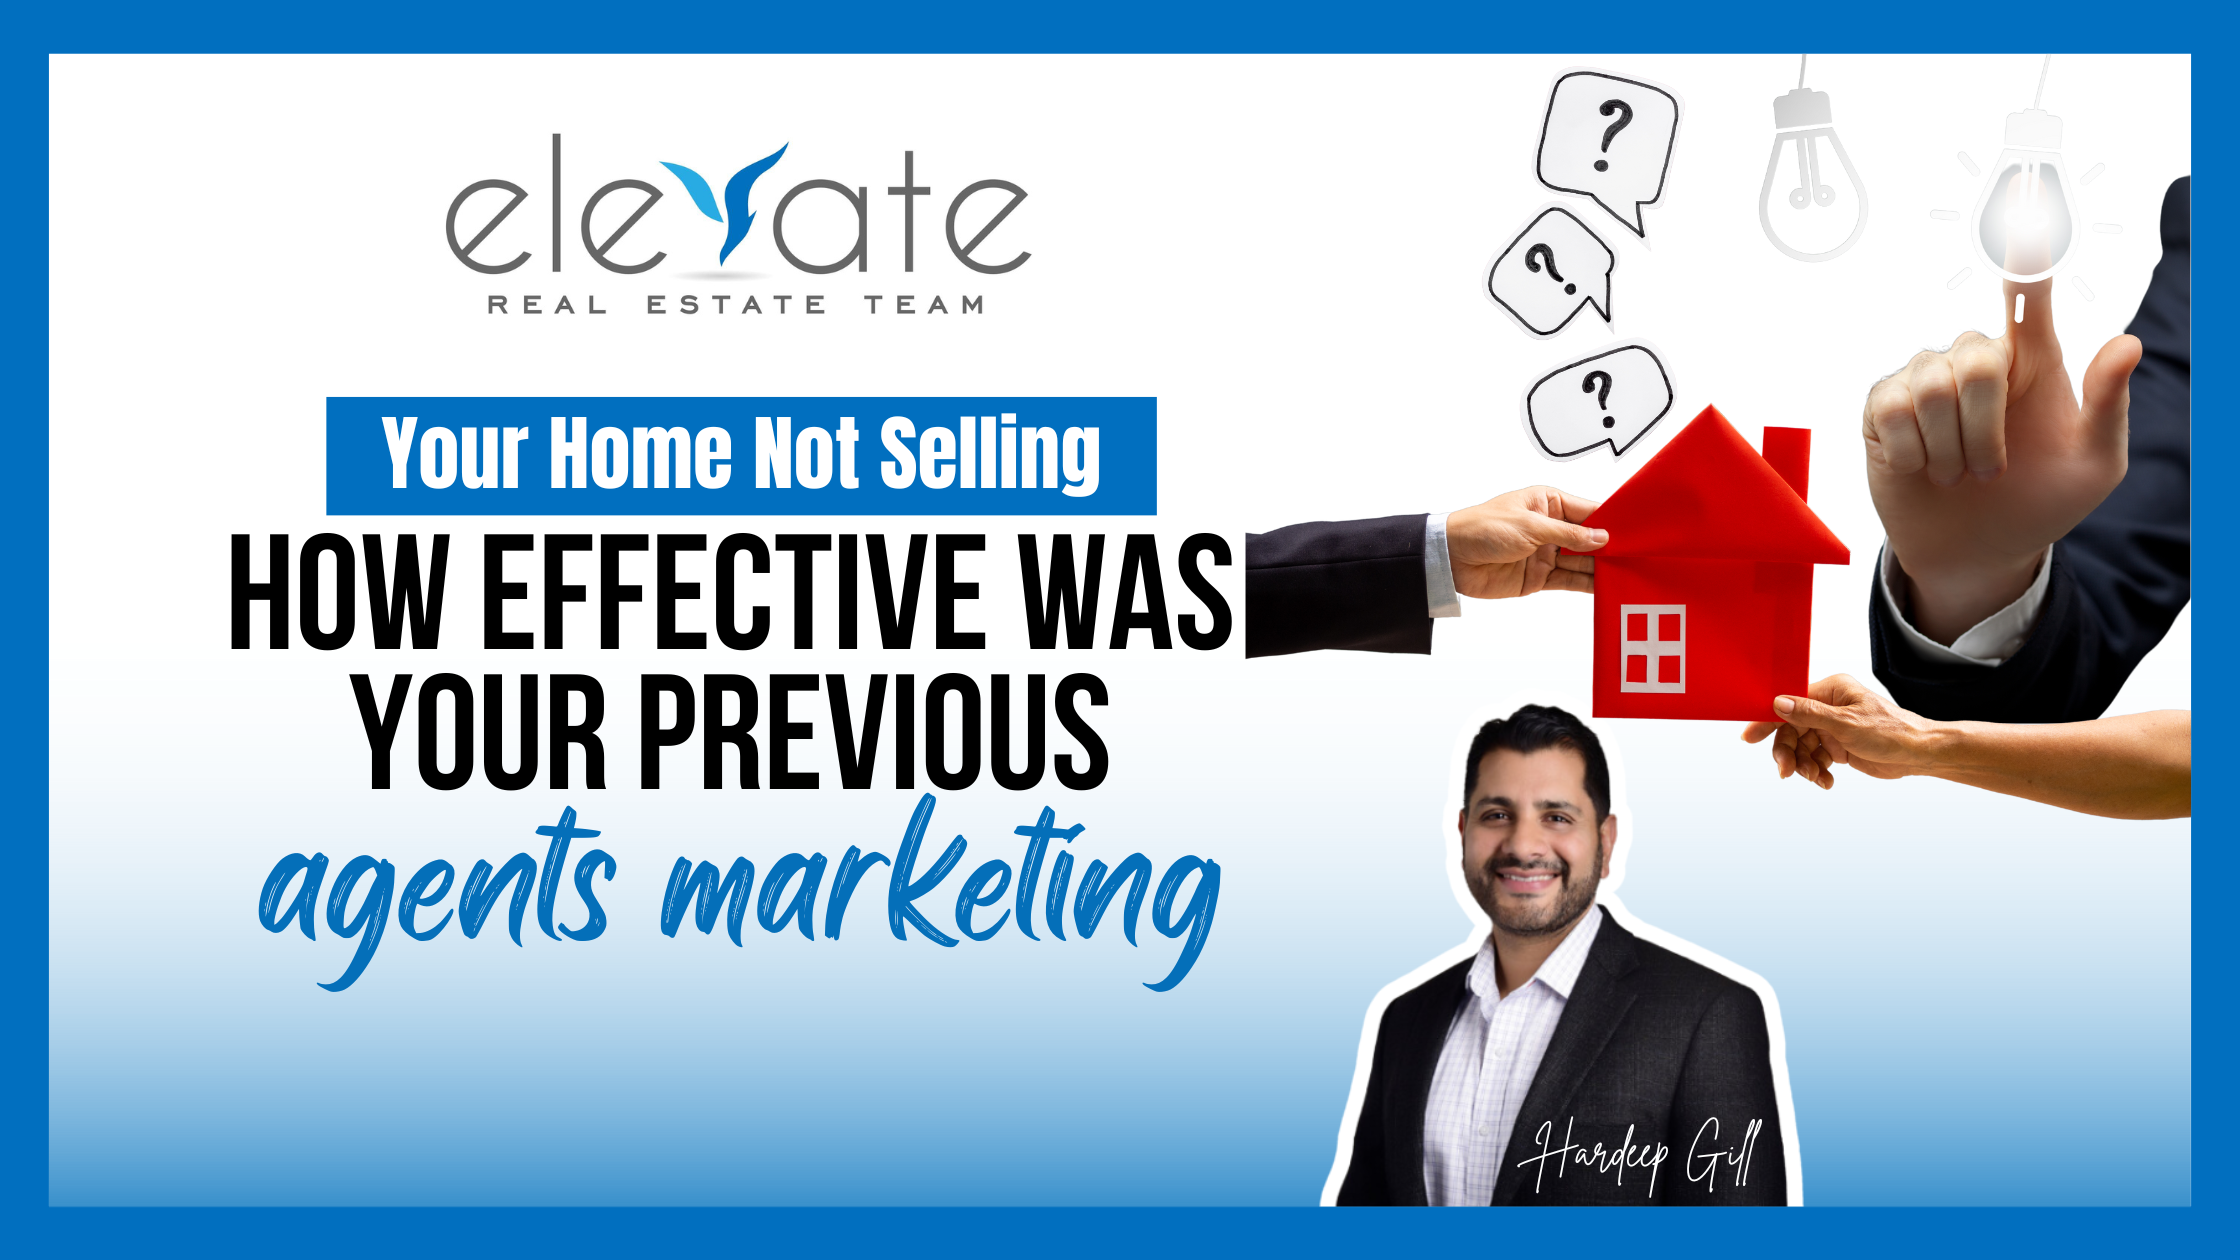 Your Home Not Selling - How Effective Was Your Previous Agents Marketing?